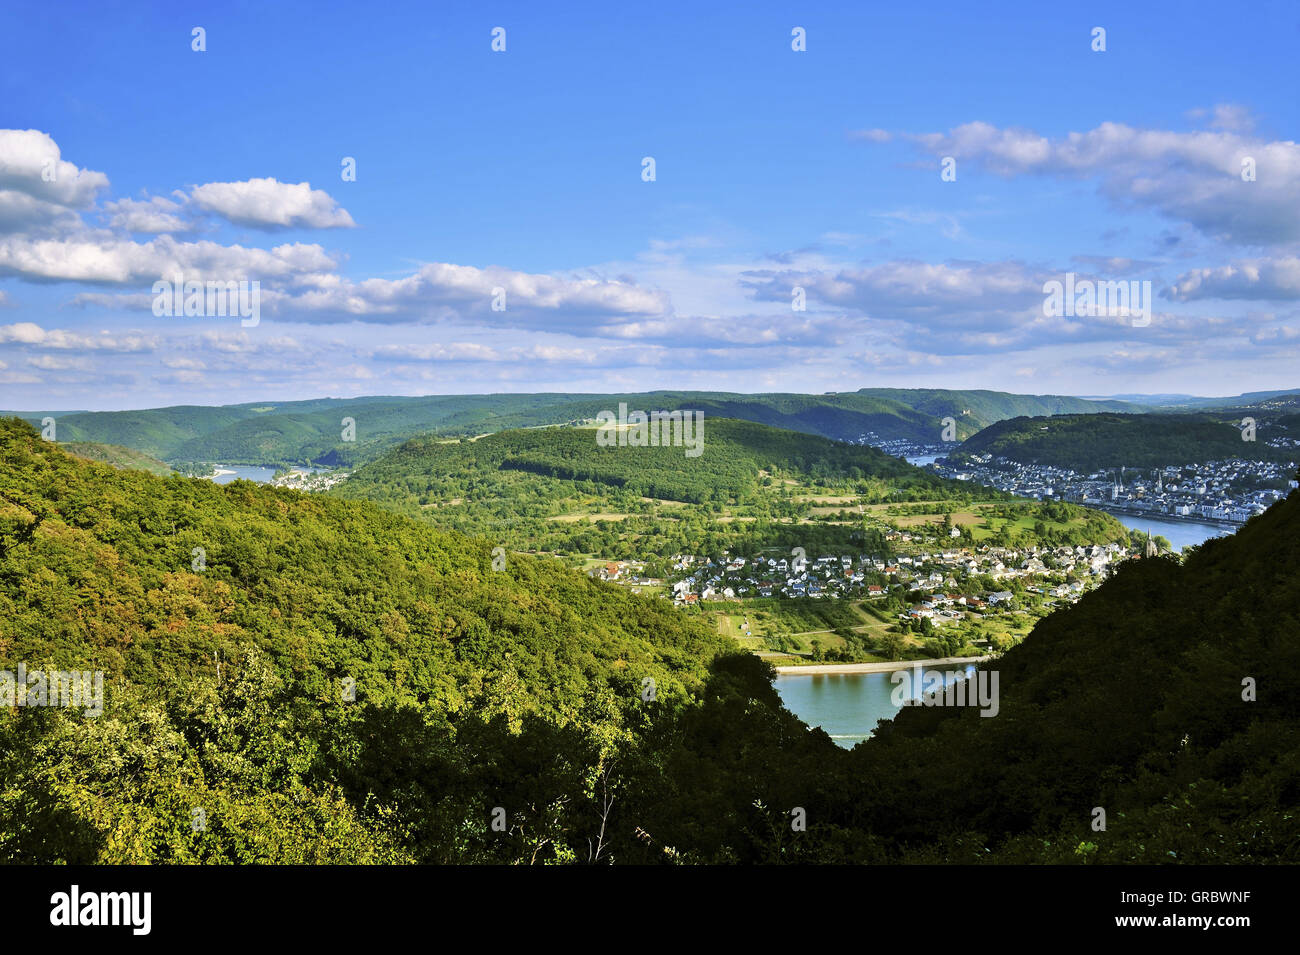 Panoramic View From Vierseenblick, Means Four Lakes View, Curvatures Of The Rhine Valley With The Impression Of Four Lakes Above Town Boppard, Upper Middle Rhine Valley, Germany Stock Photo